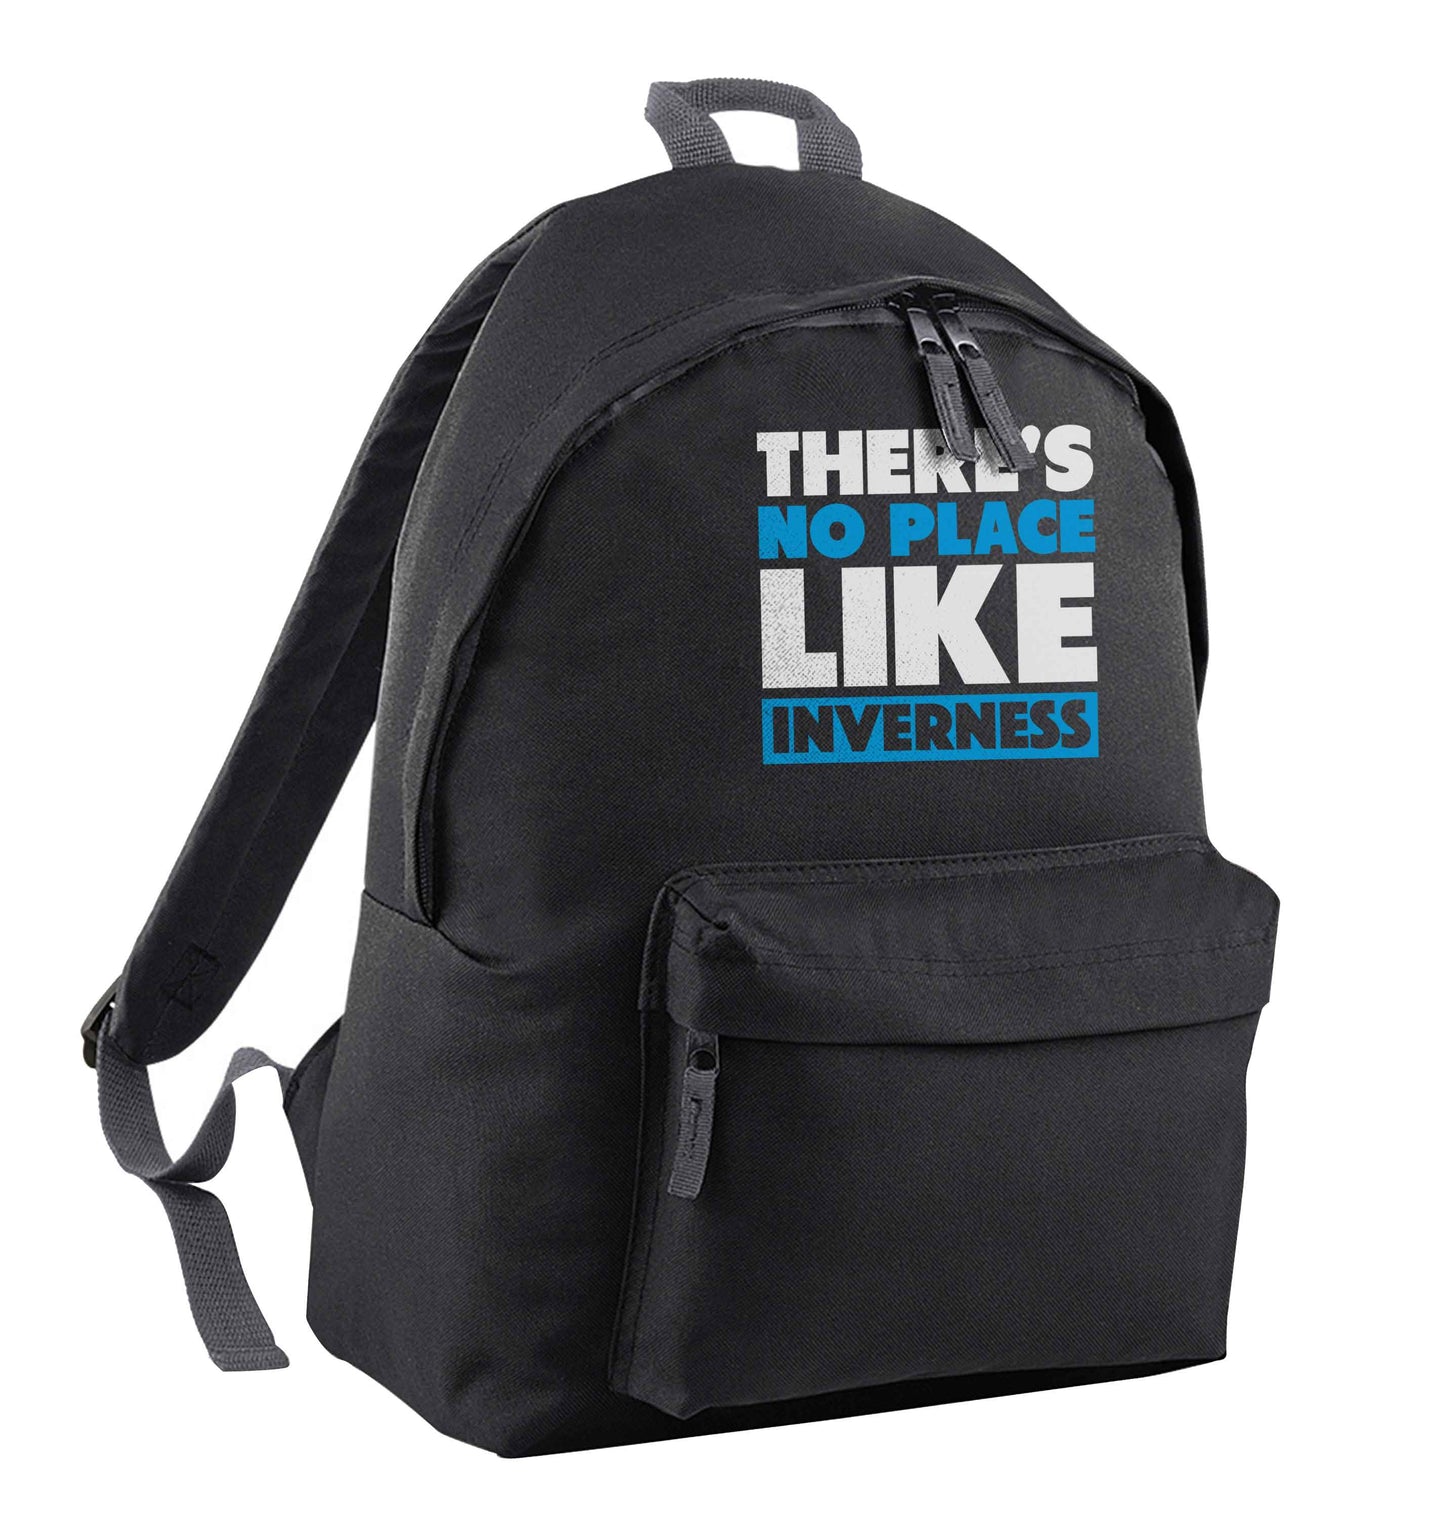 There's no place like Inverness black adults backpack